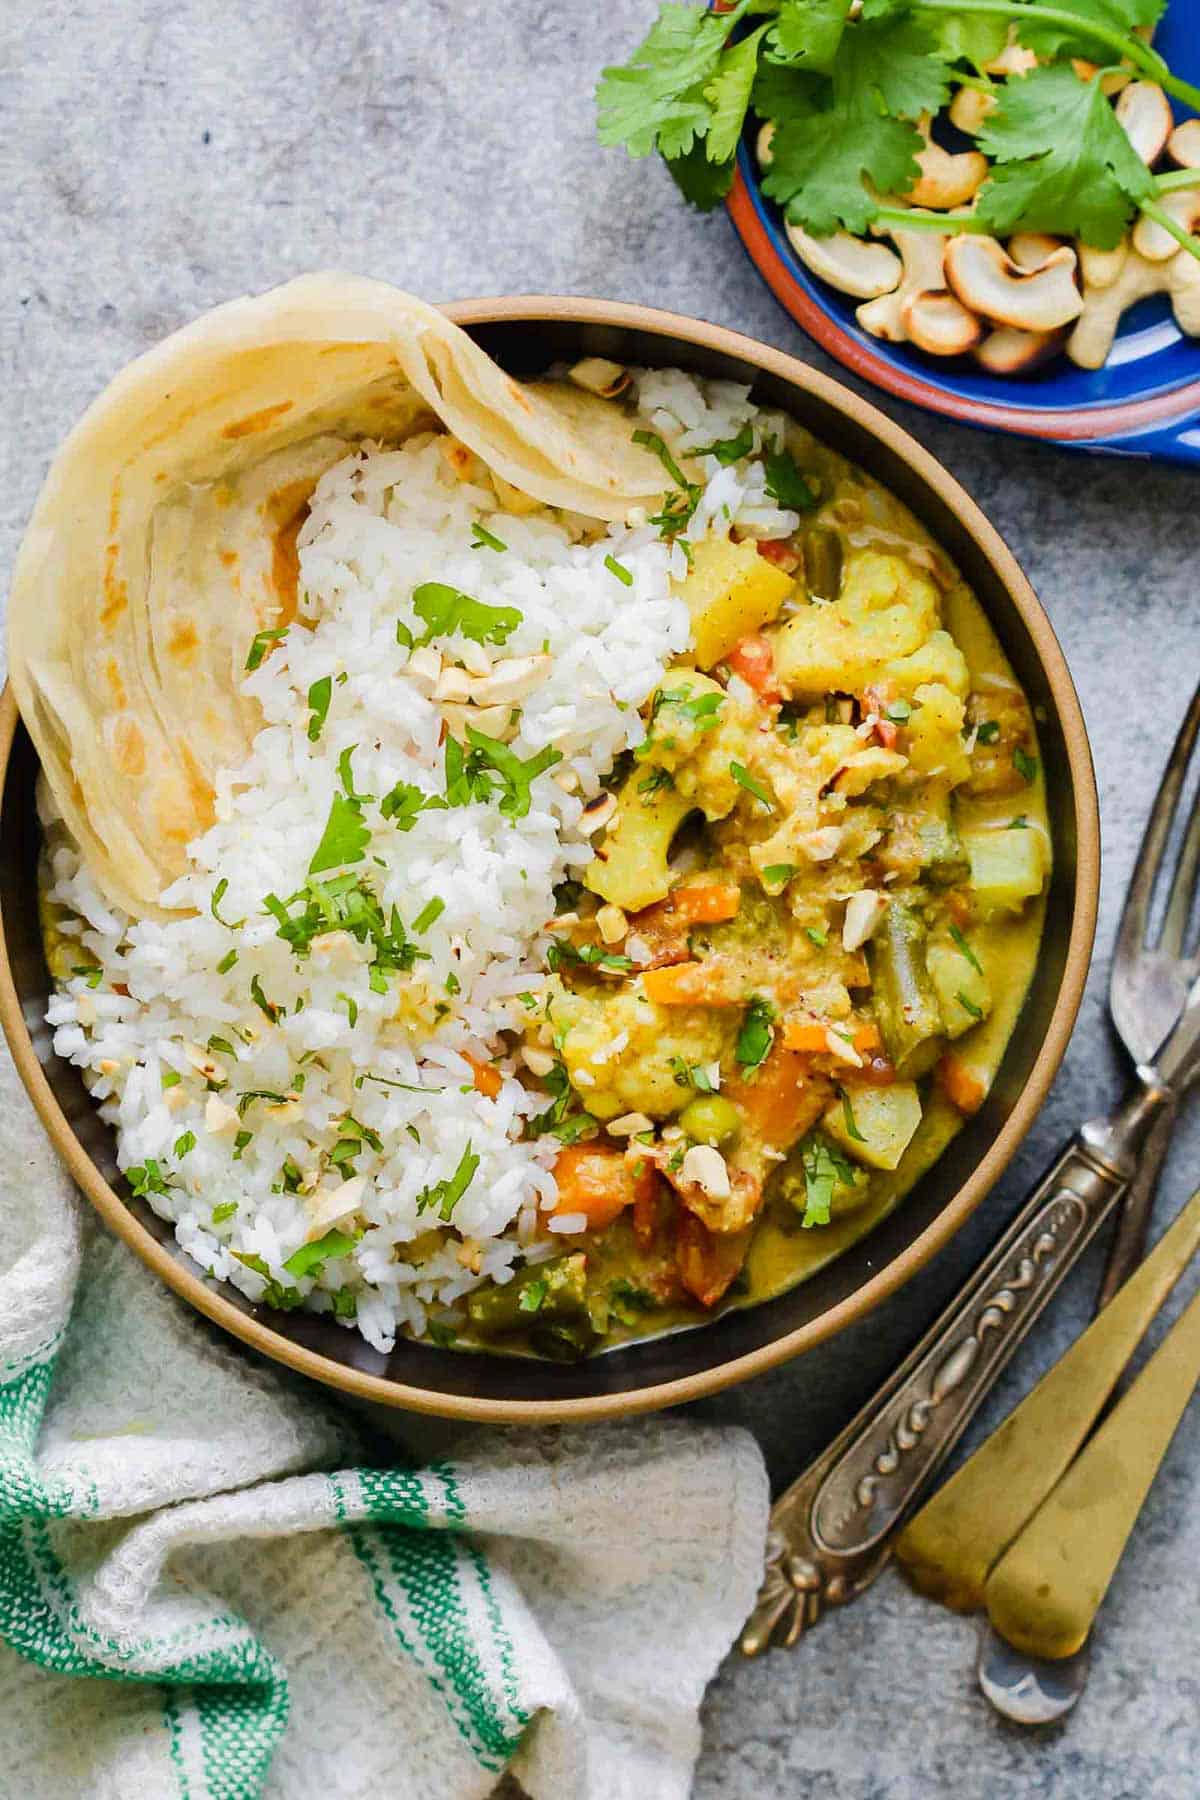 Vegetable Korma Curry served in a bowl with rice, malabar paratha and topped with crunchy cashews